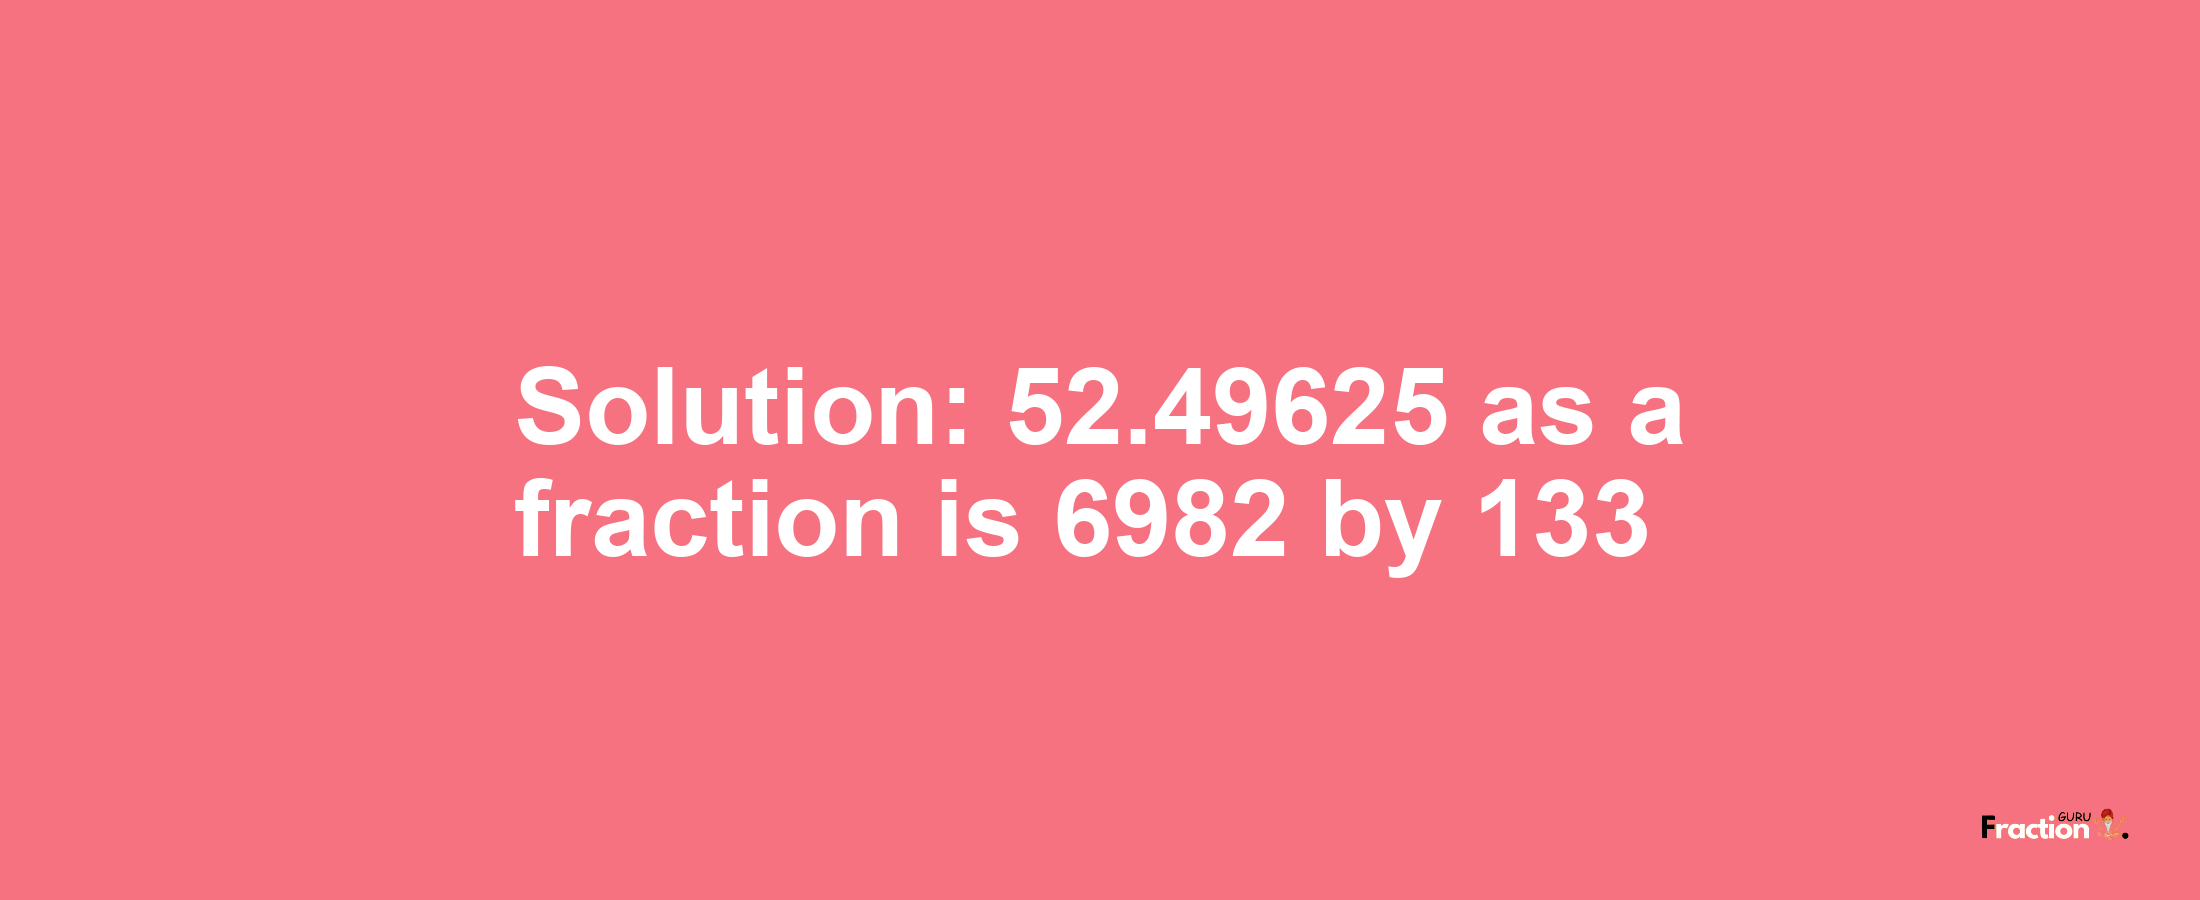 Solution:52.49625 as a fraction is 6982/133